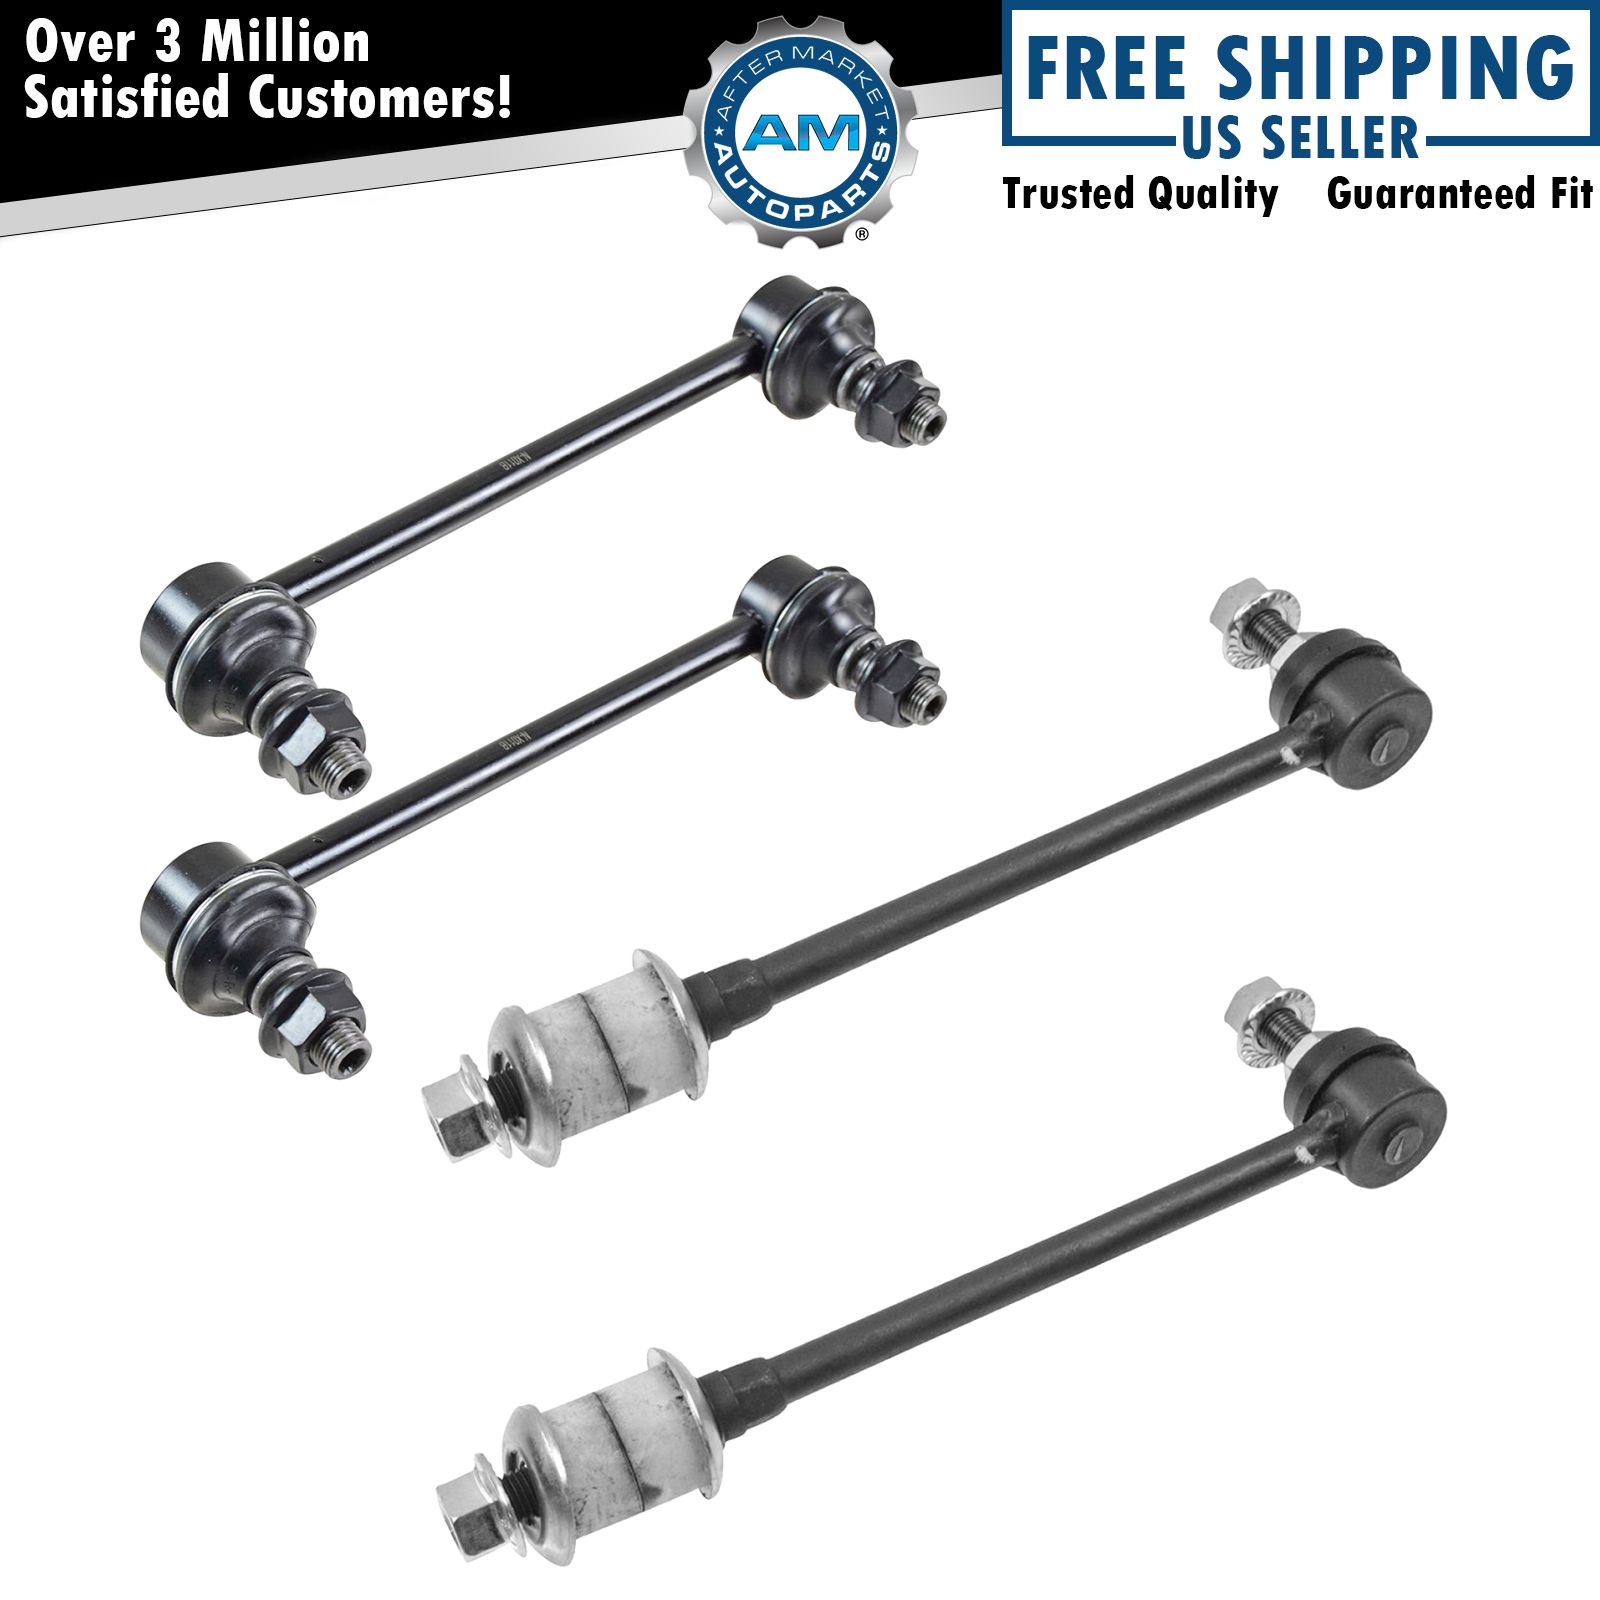 4 Piece Kit Stabilizer Sway Bar End Link Front Rear LH RH for Pathfinder QX4 New